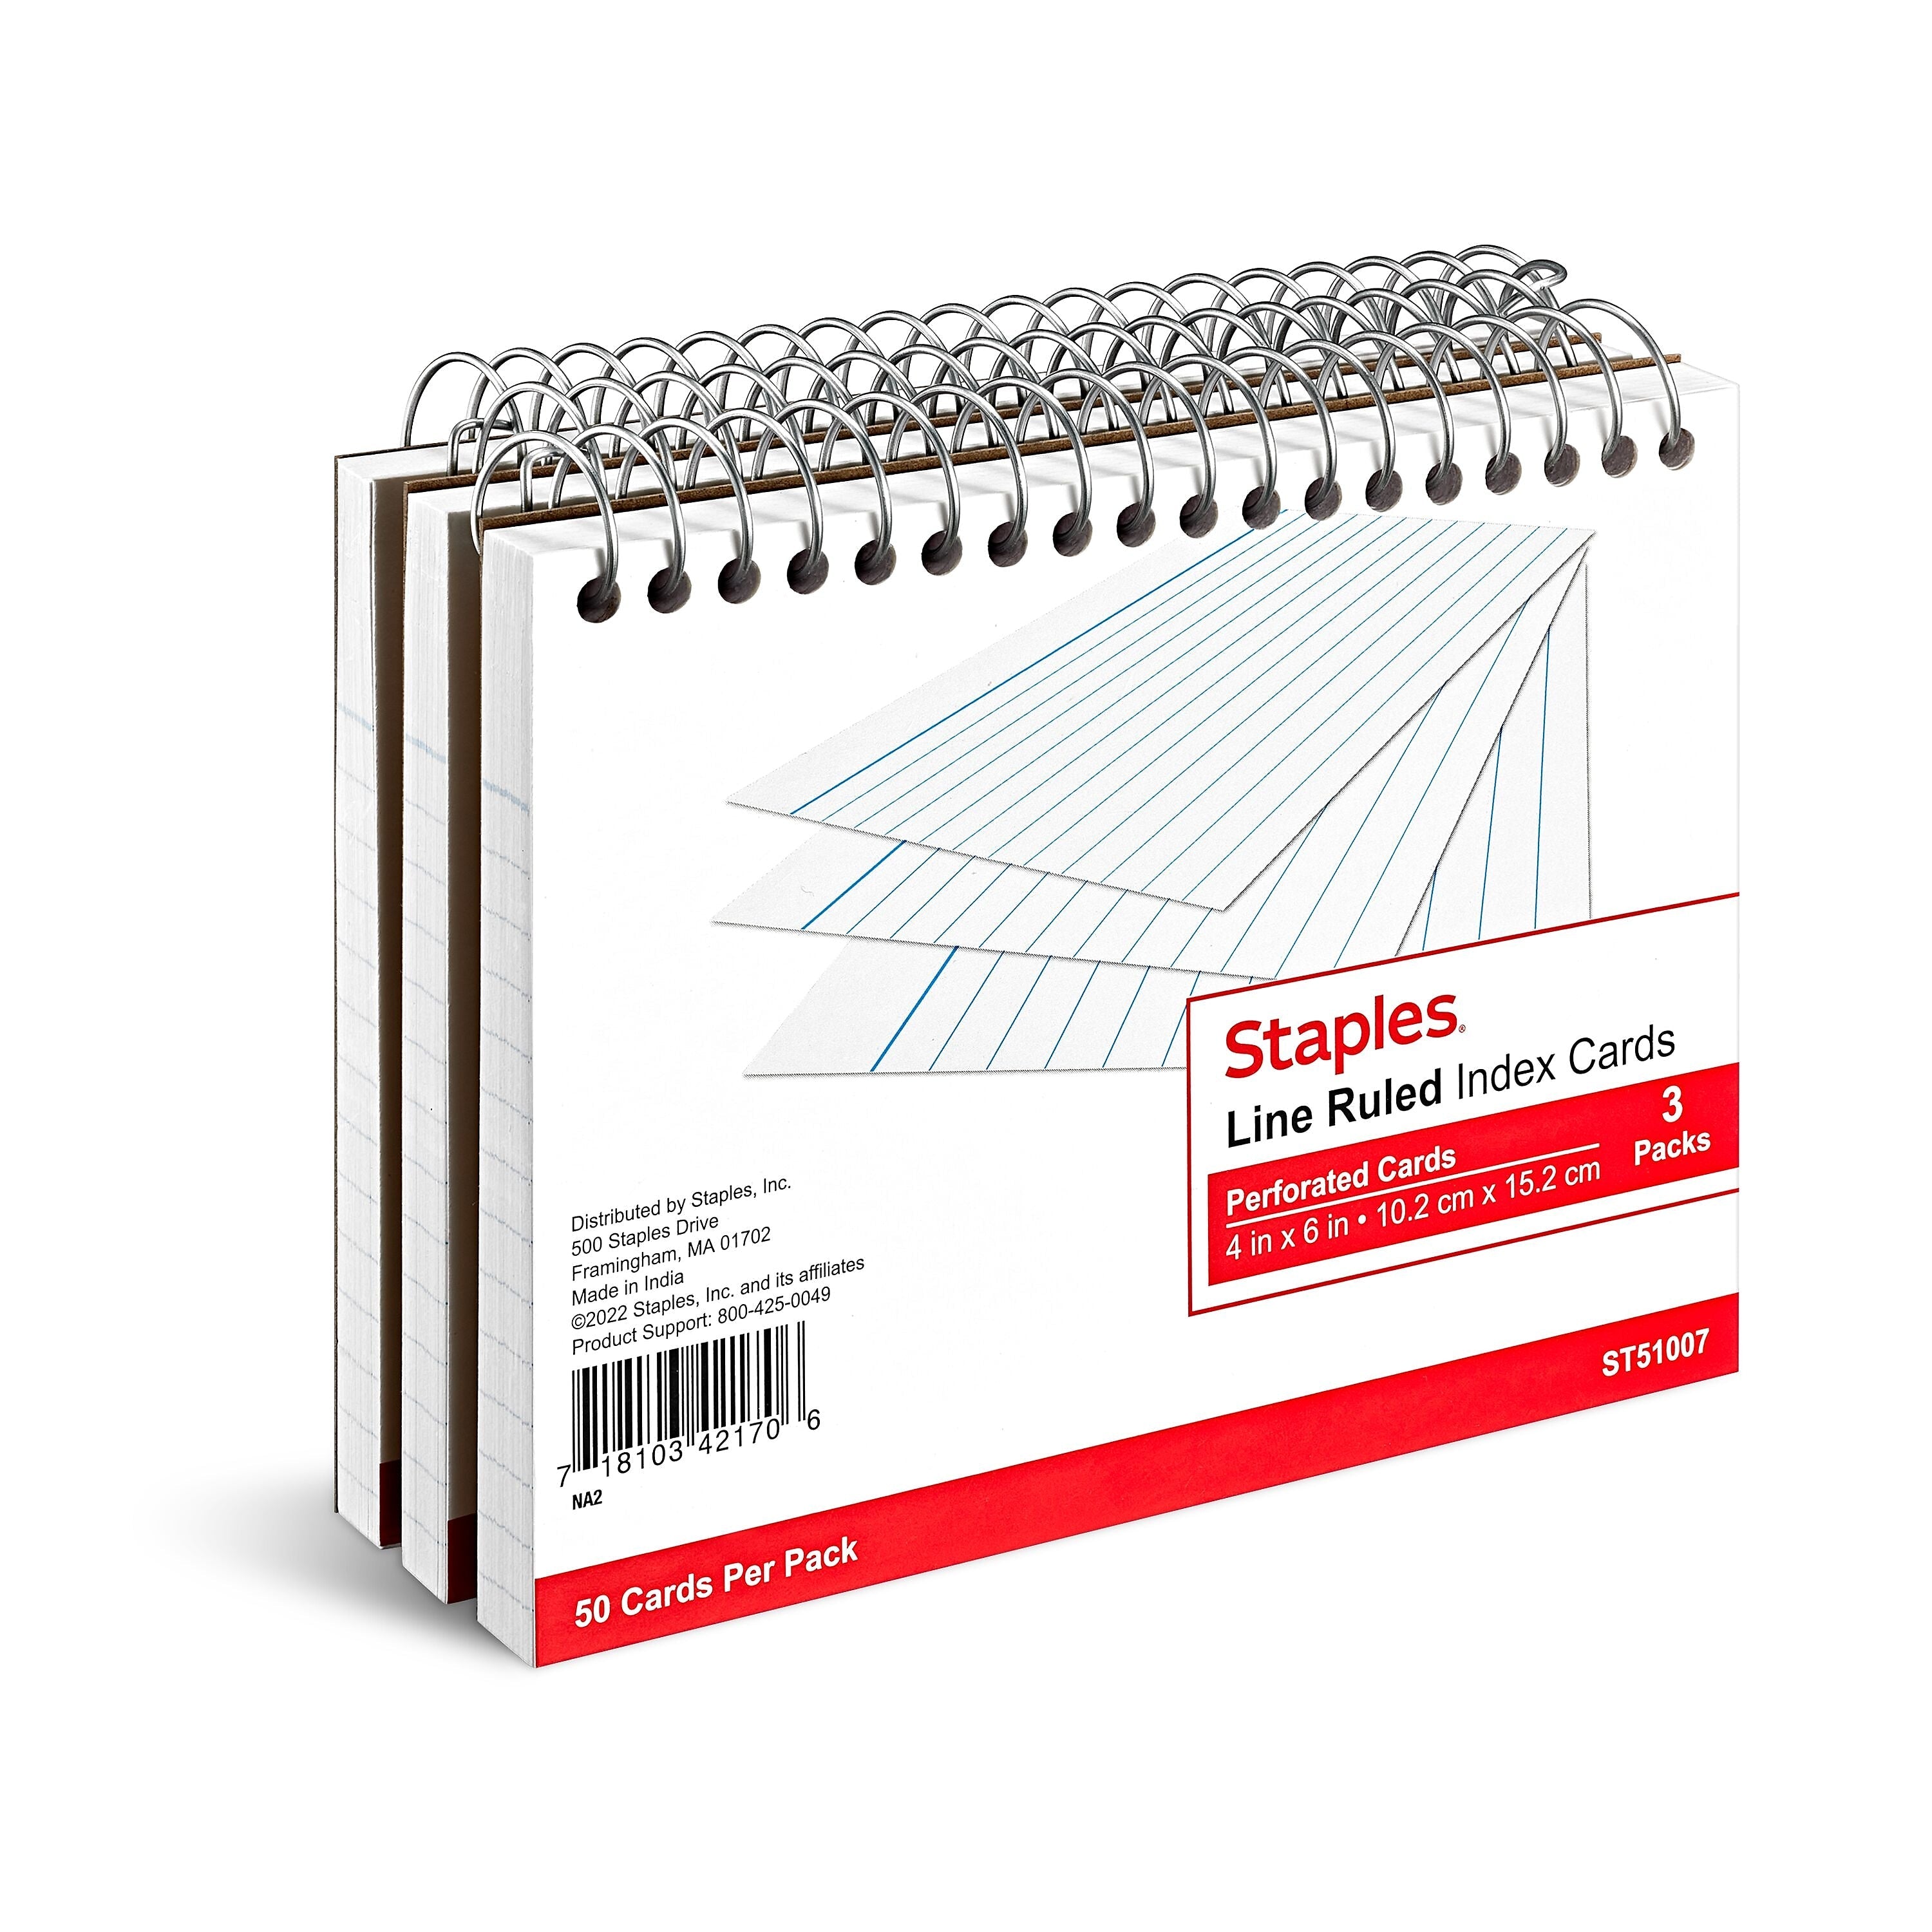 Staples™ 4" x 6" Index Cards, Lined, White, 50 Cards/Pack, 3 Pack/Carton